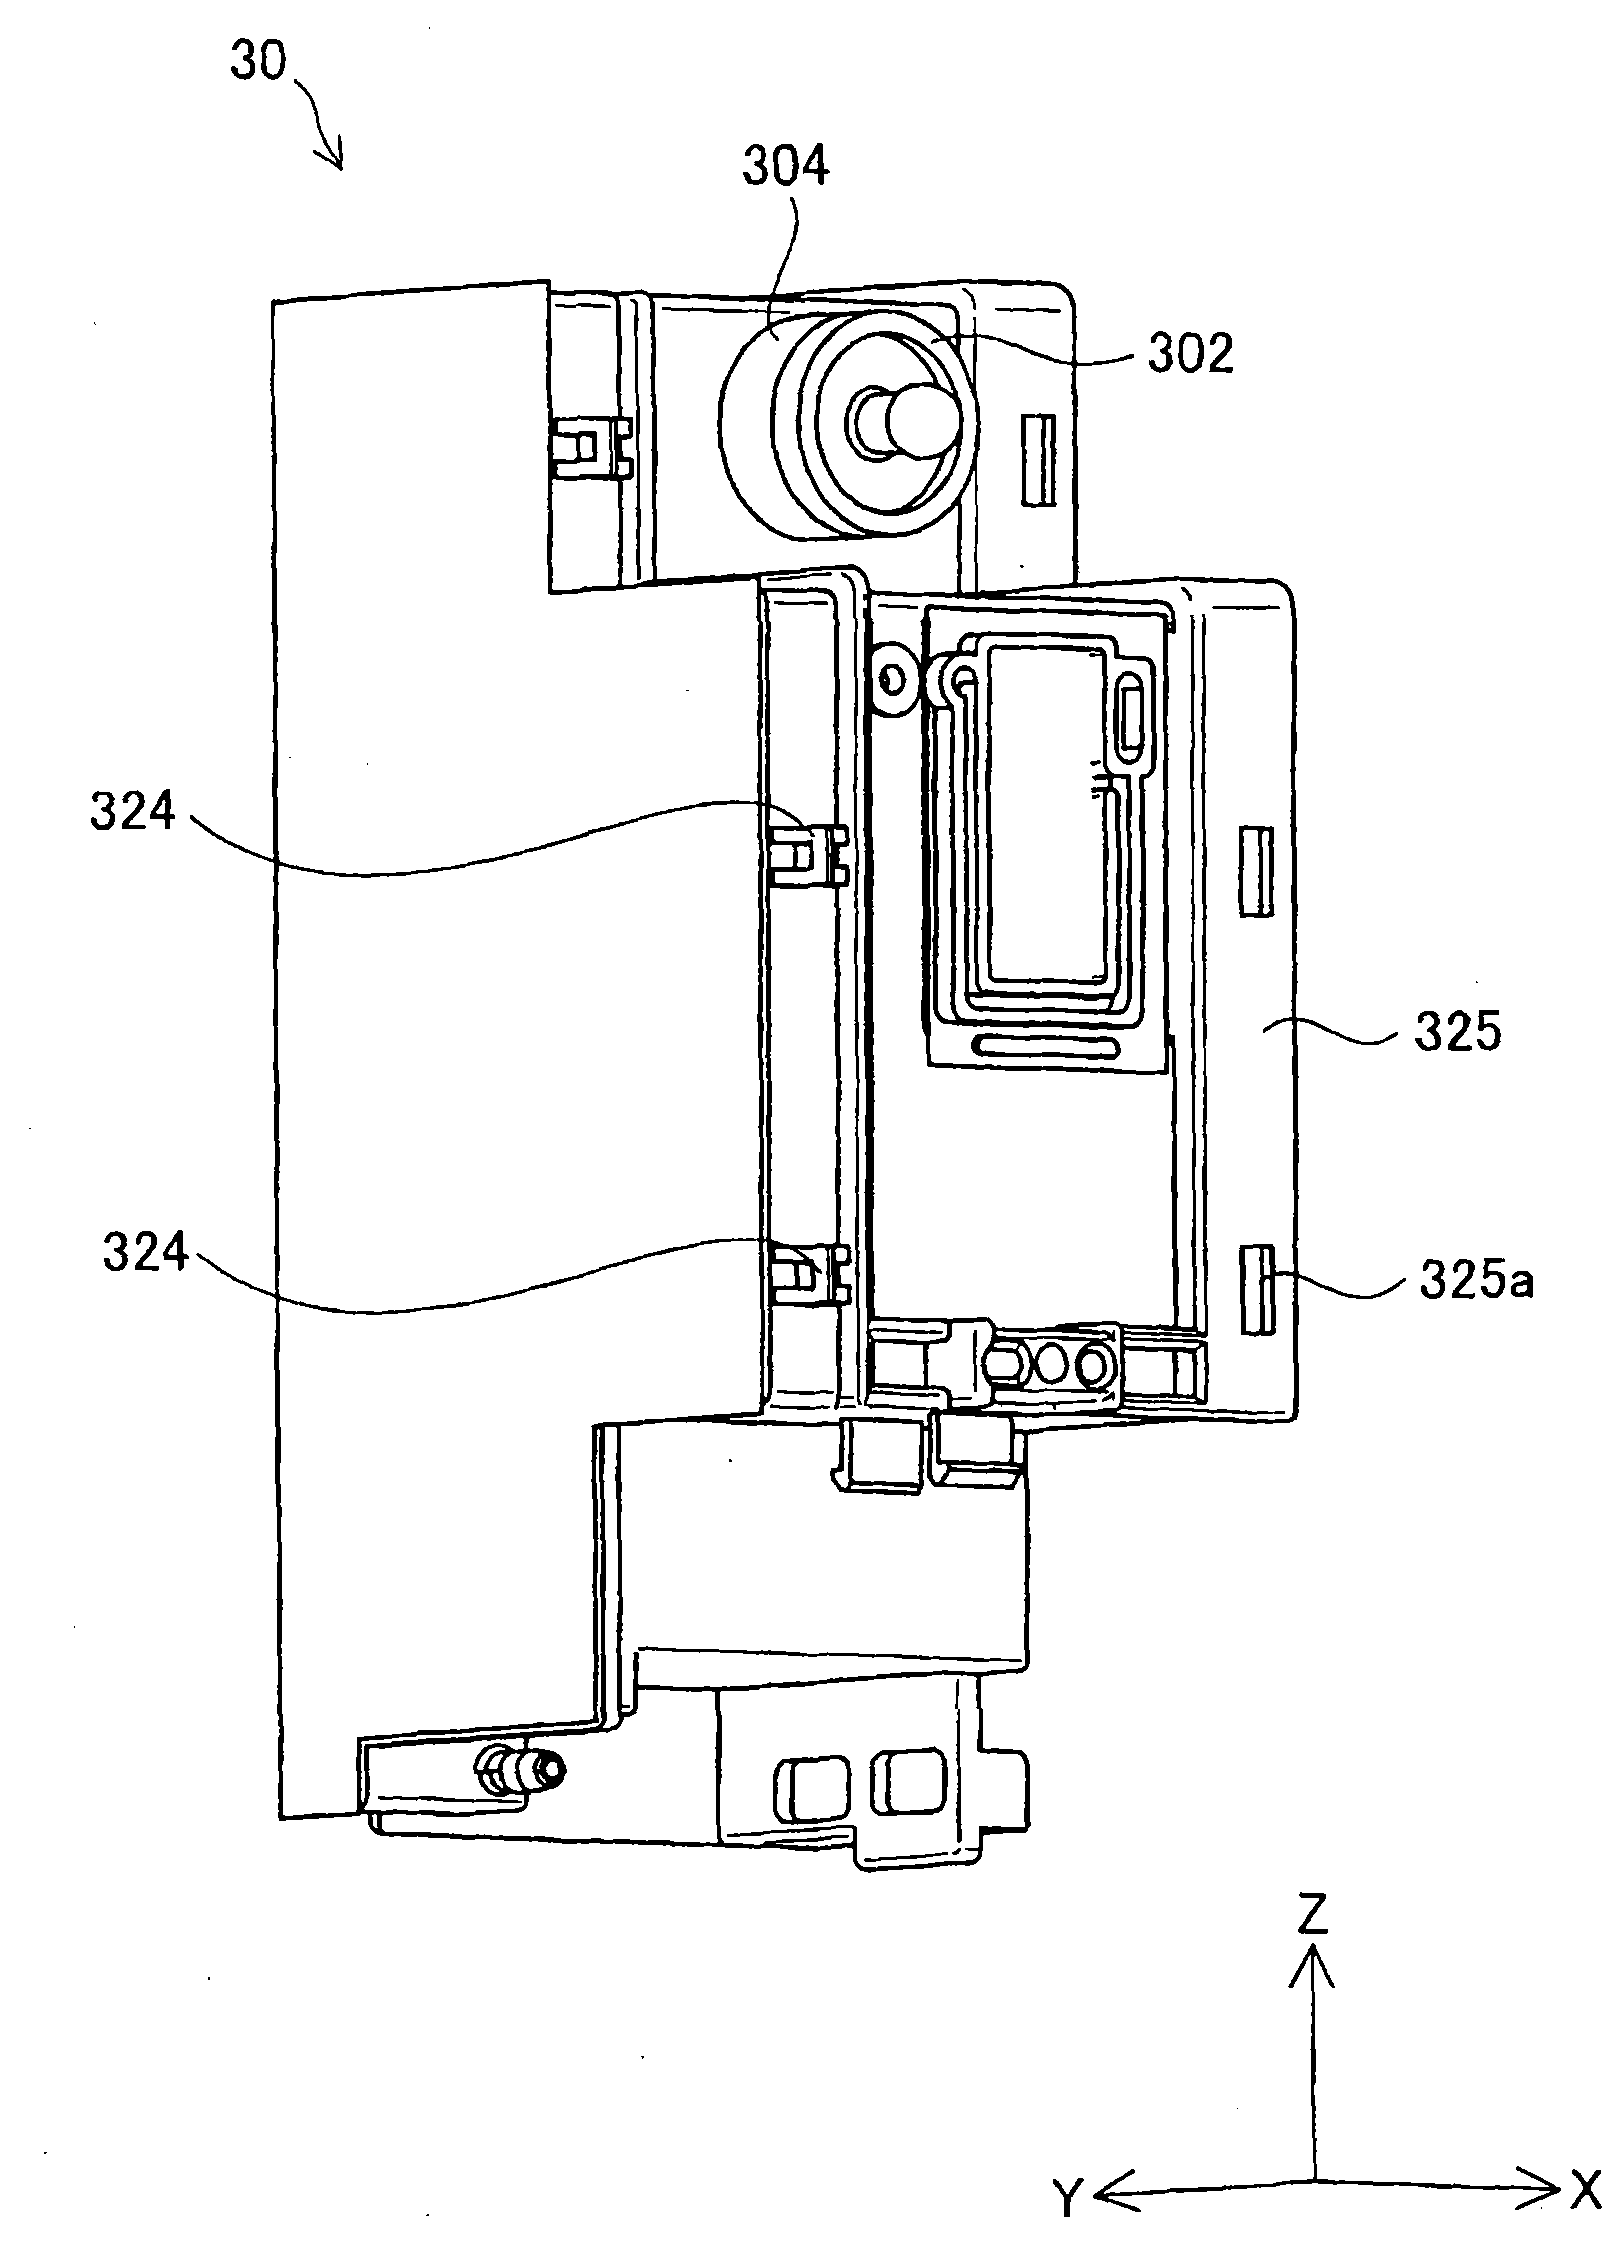 Liquid container and liquid ejection system